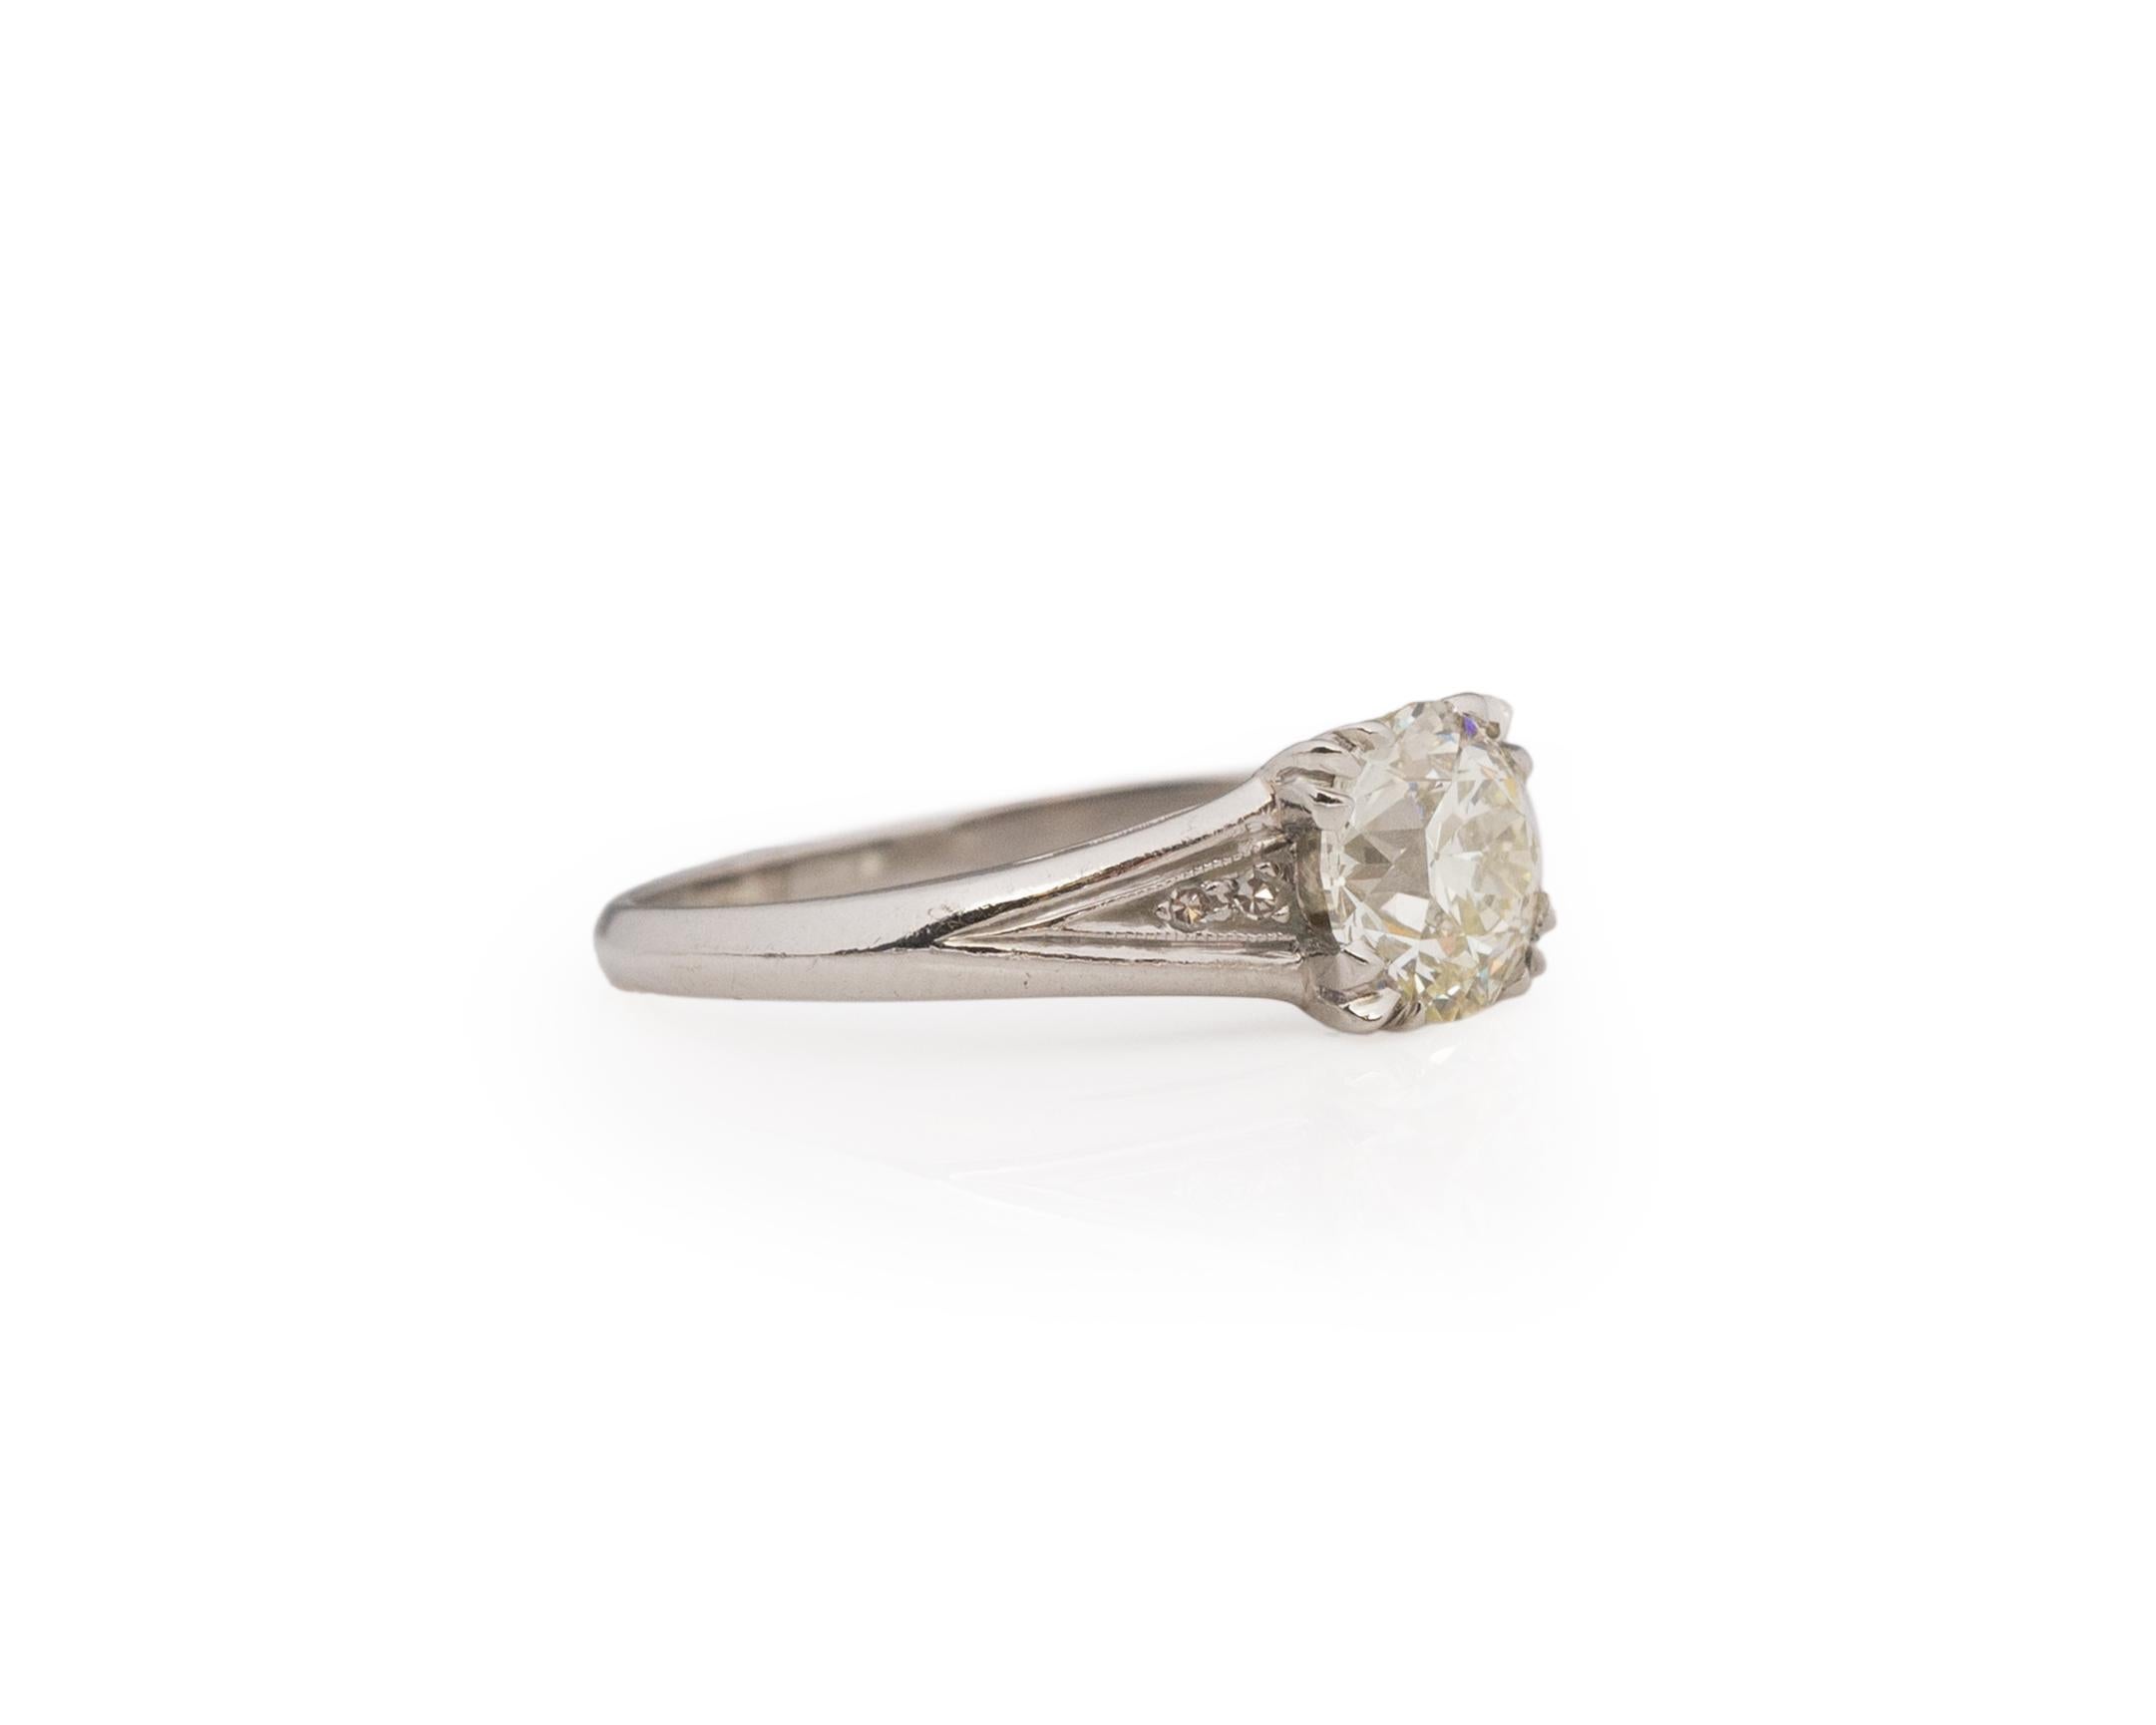 Ring Size: 5
Metal Type: Platinum [Hallmarked, and Tested]
Weight: 3.3 grams

Center Diamond Details:
GIA REPORT #:6227543469
Weight: 1.08ct
Cut: Old European brilliant
Color: M
Clarity: VS1
Measurements: 6.61mm x 6.35mm x 4.16mm

Finger to Top of